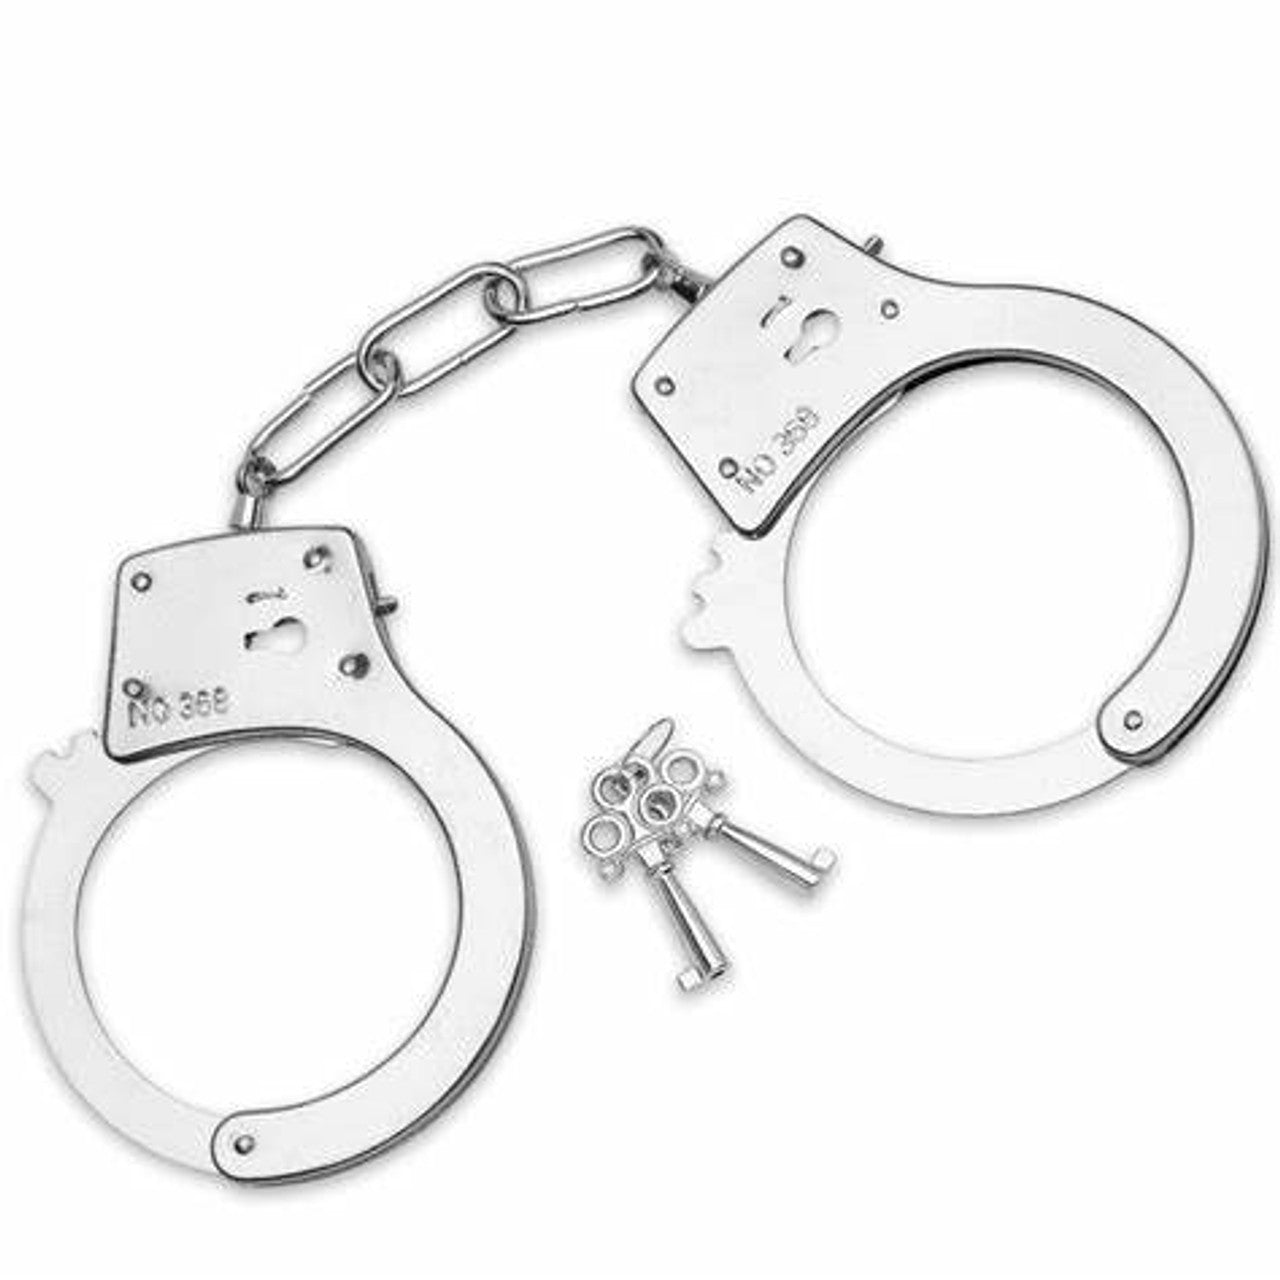 Party Set Toy Handcuffs (Set of 4)